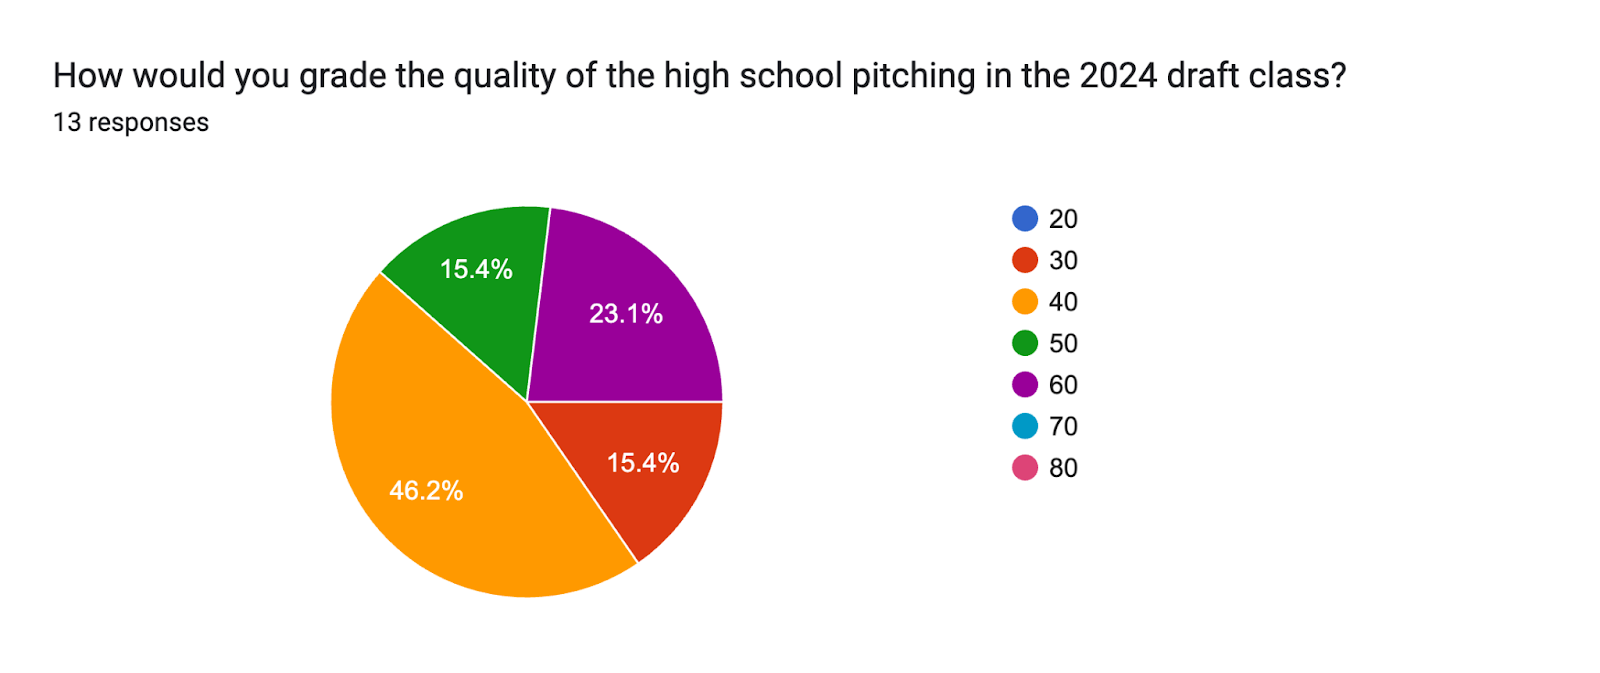 Forms response chart. Question title: How would you grade the quality of the high school pitching in the 2024 draft class?. Number of responses: 13 responses.